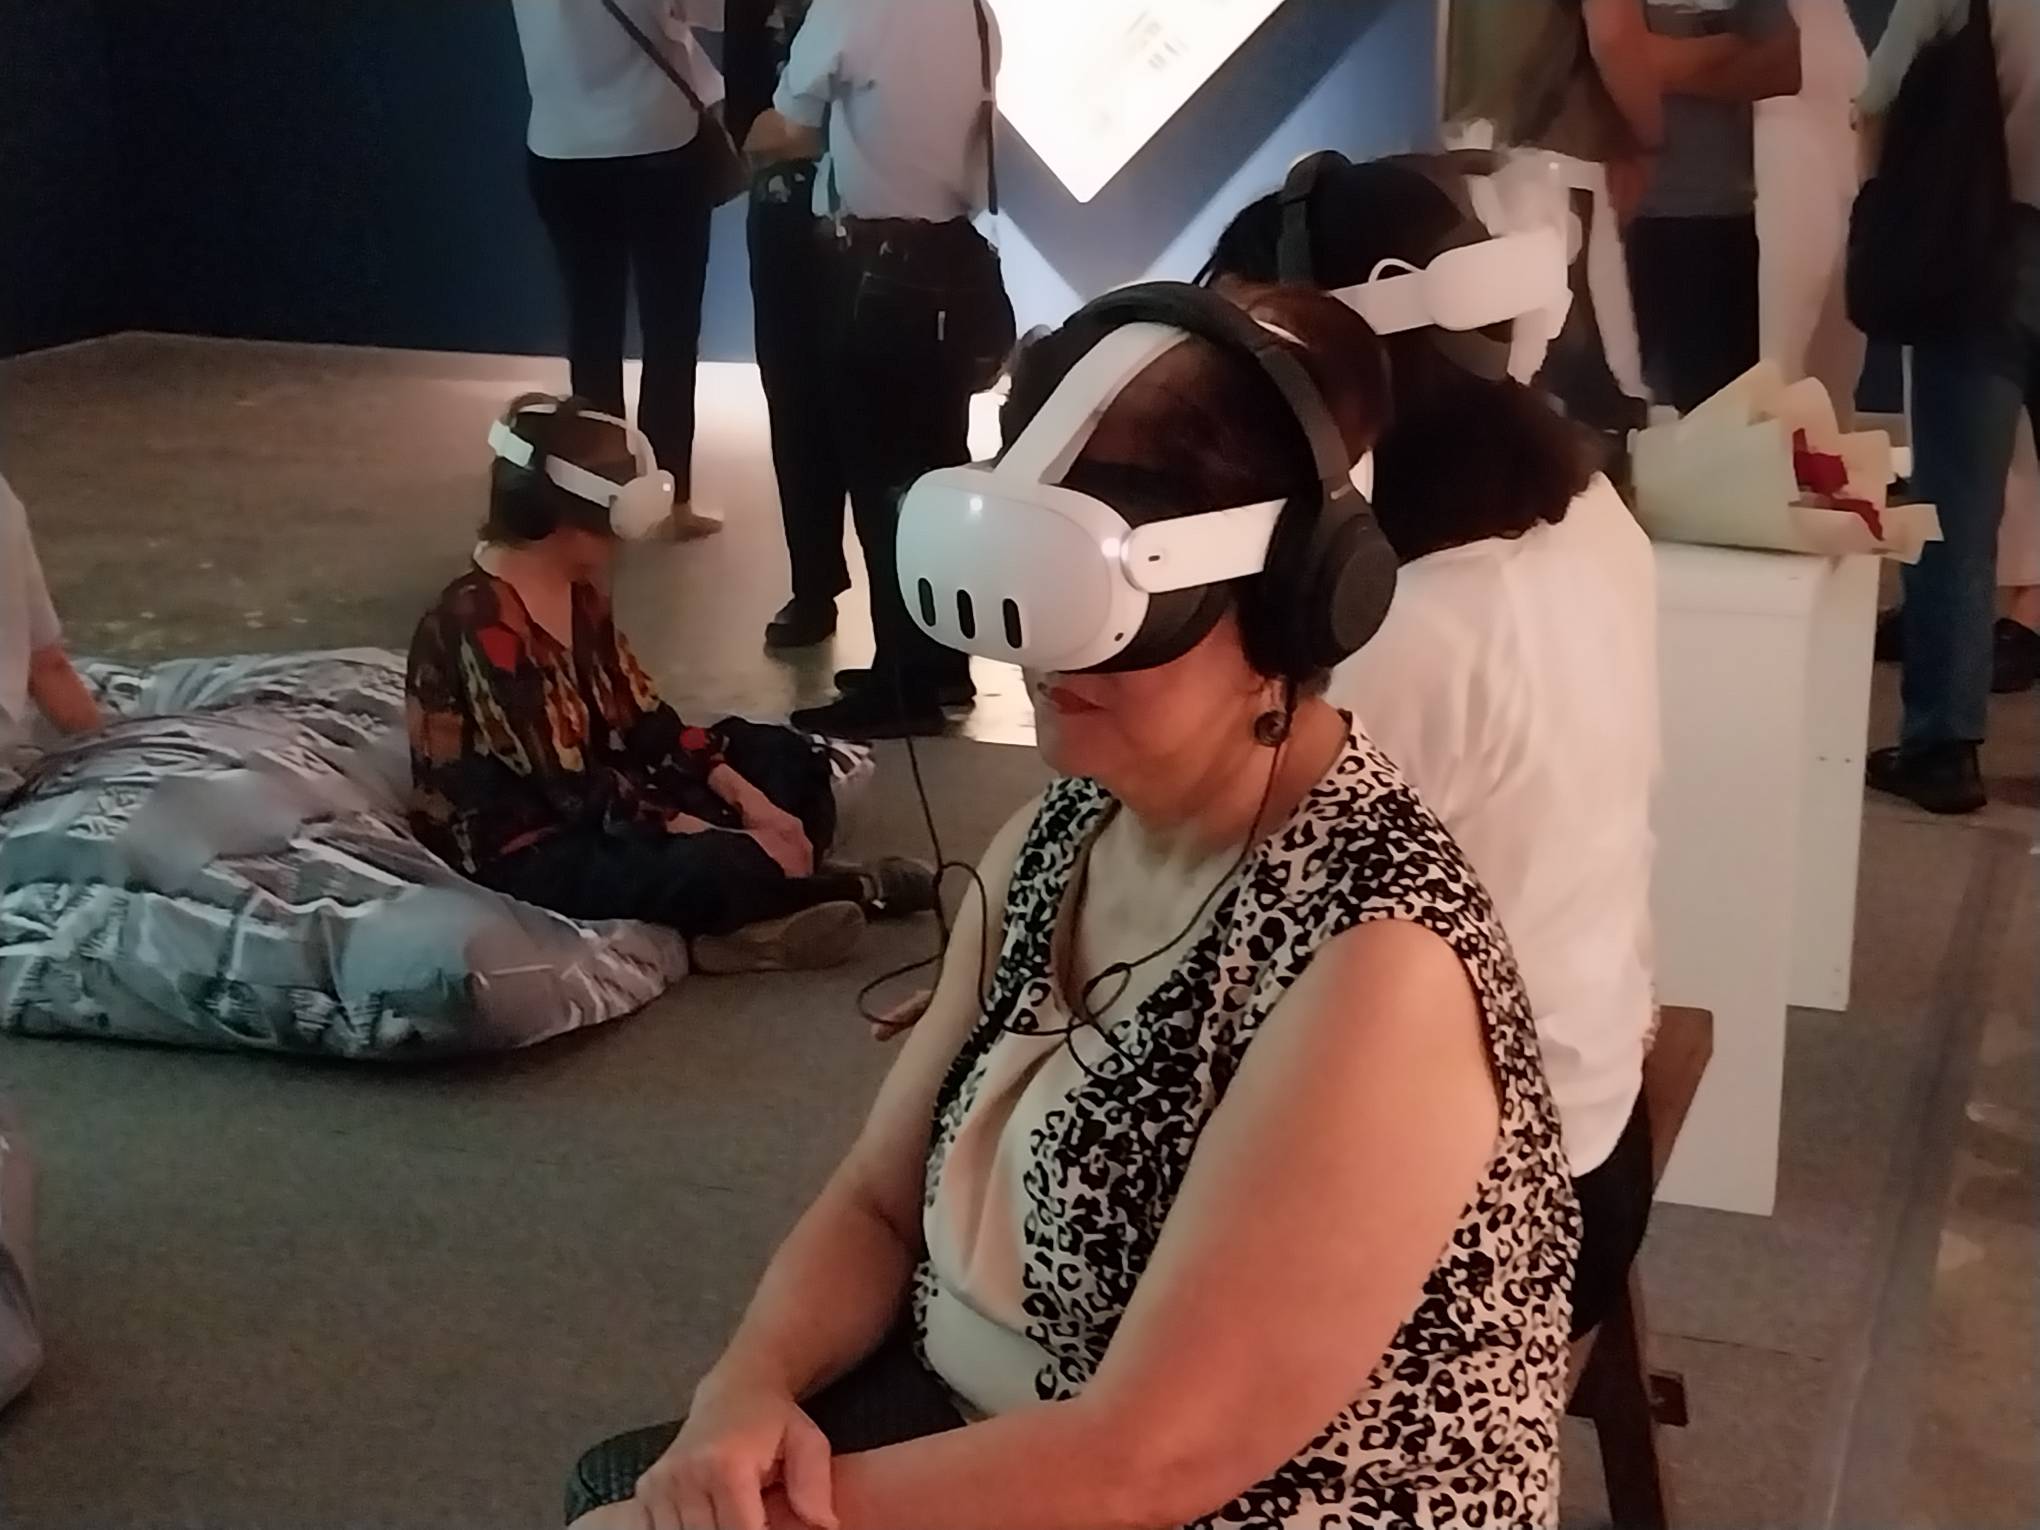 One of the spectators using the VR component of the exhibit. Photo by Elle Yap.